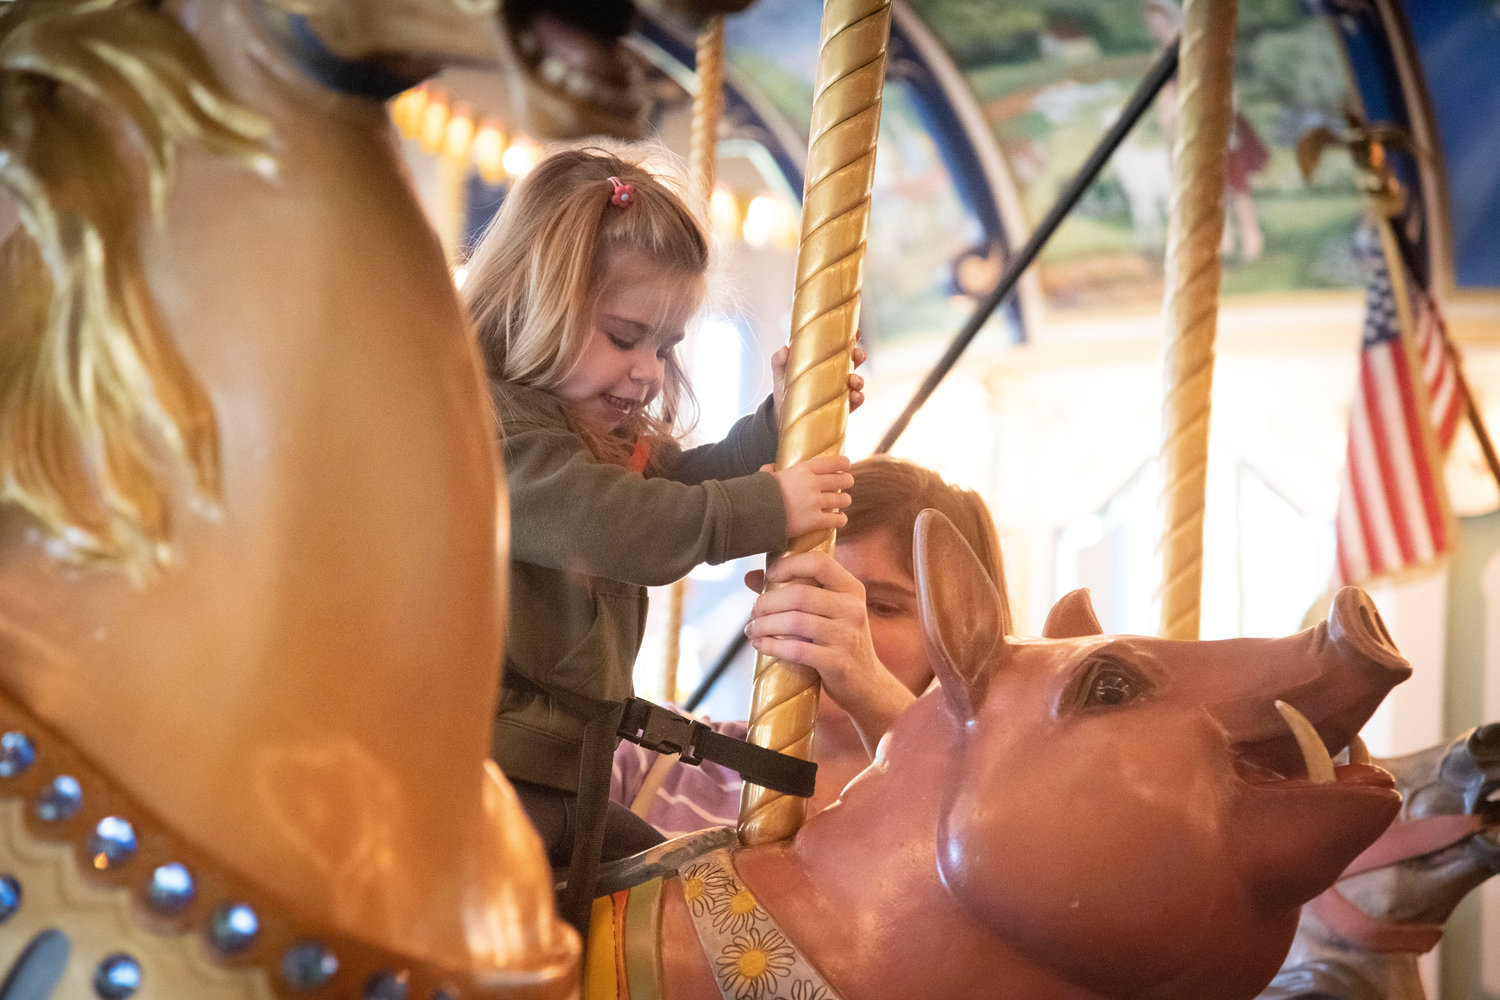 Aubrey Donaldson, 2, of Newark, Del., who was in the area visiting her grandpop last Sunday, takes a ride on the merry-go-round pig at Giggleberry Fair in Peddler’s Village, Lahaska, which has been hosting a Summer Block Party every weekend through the month of June.